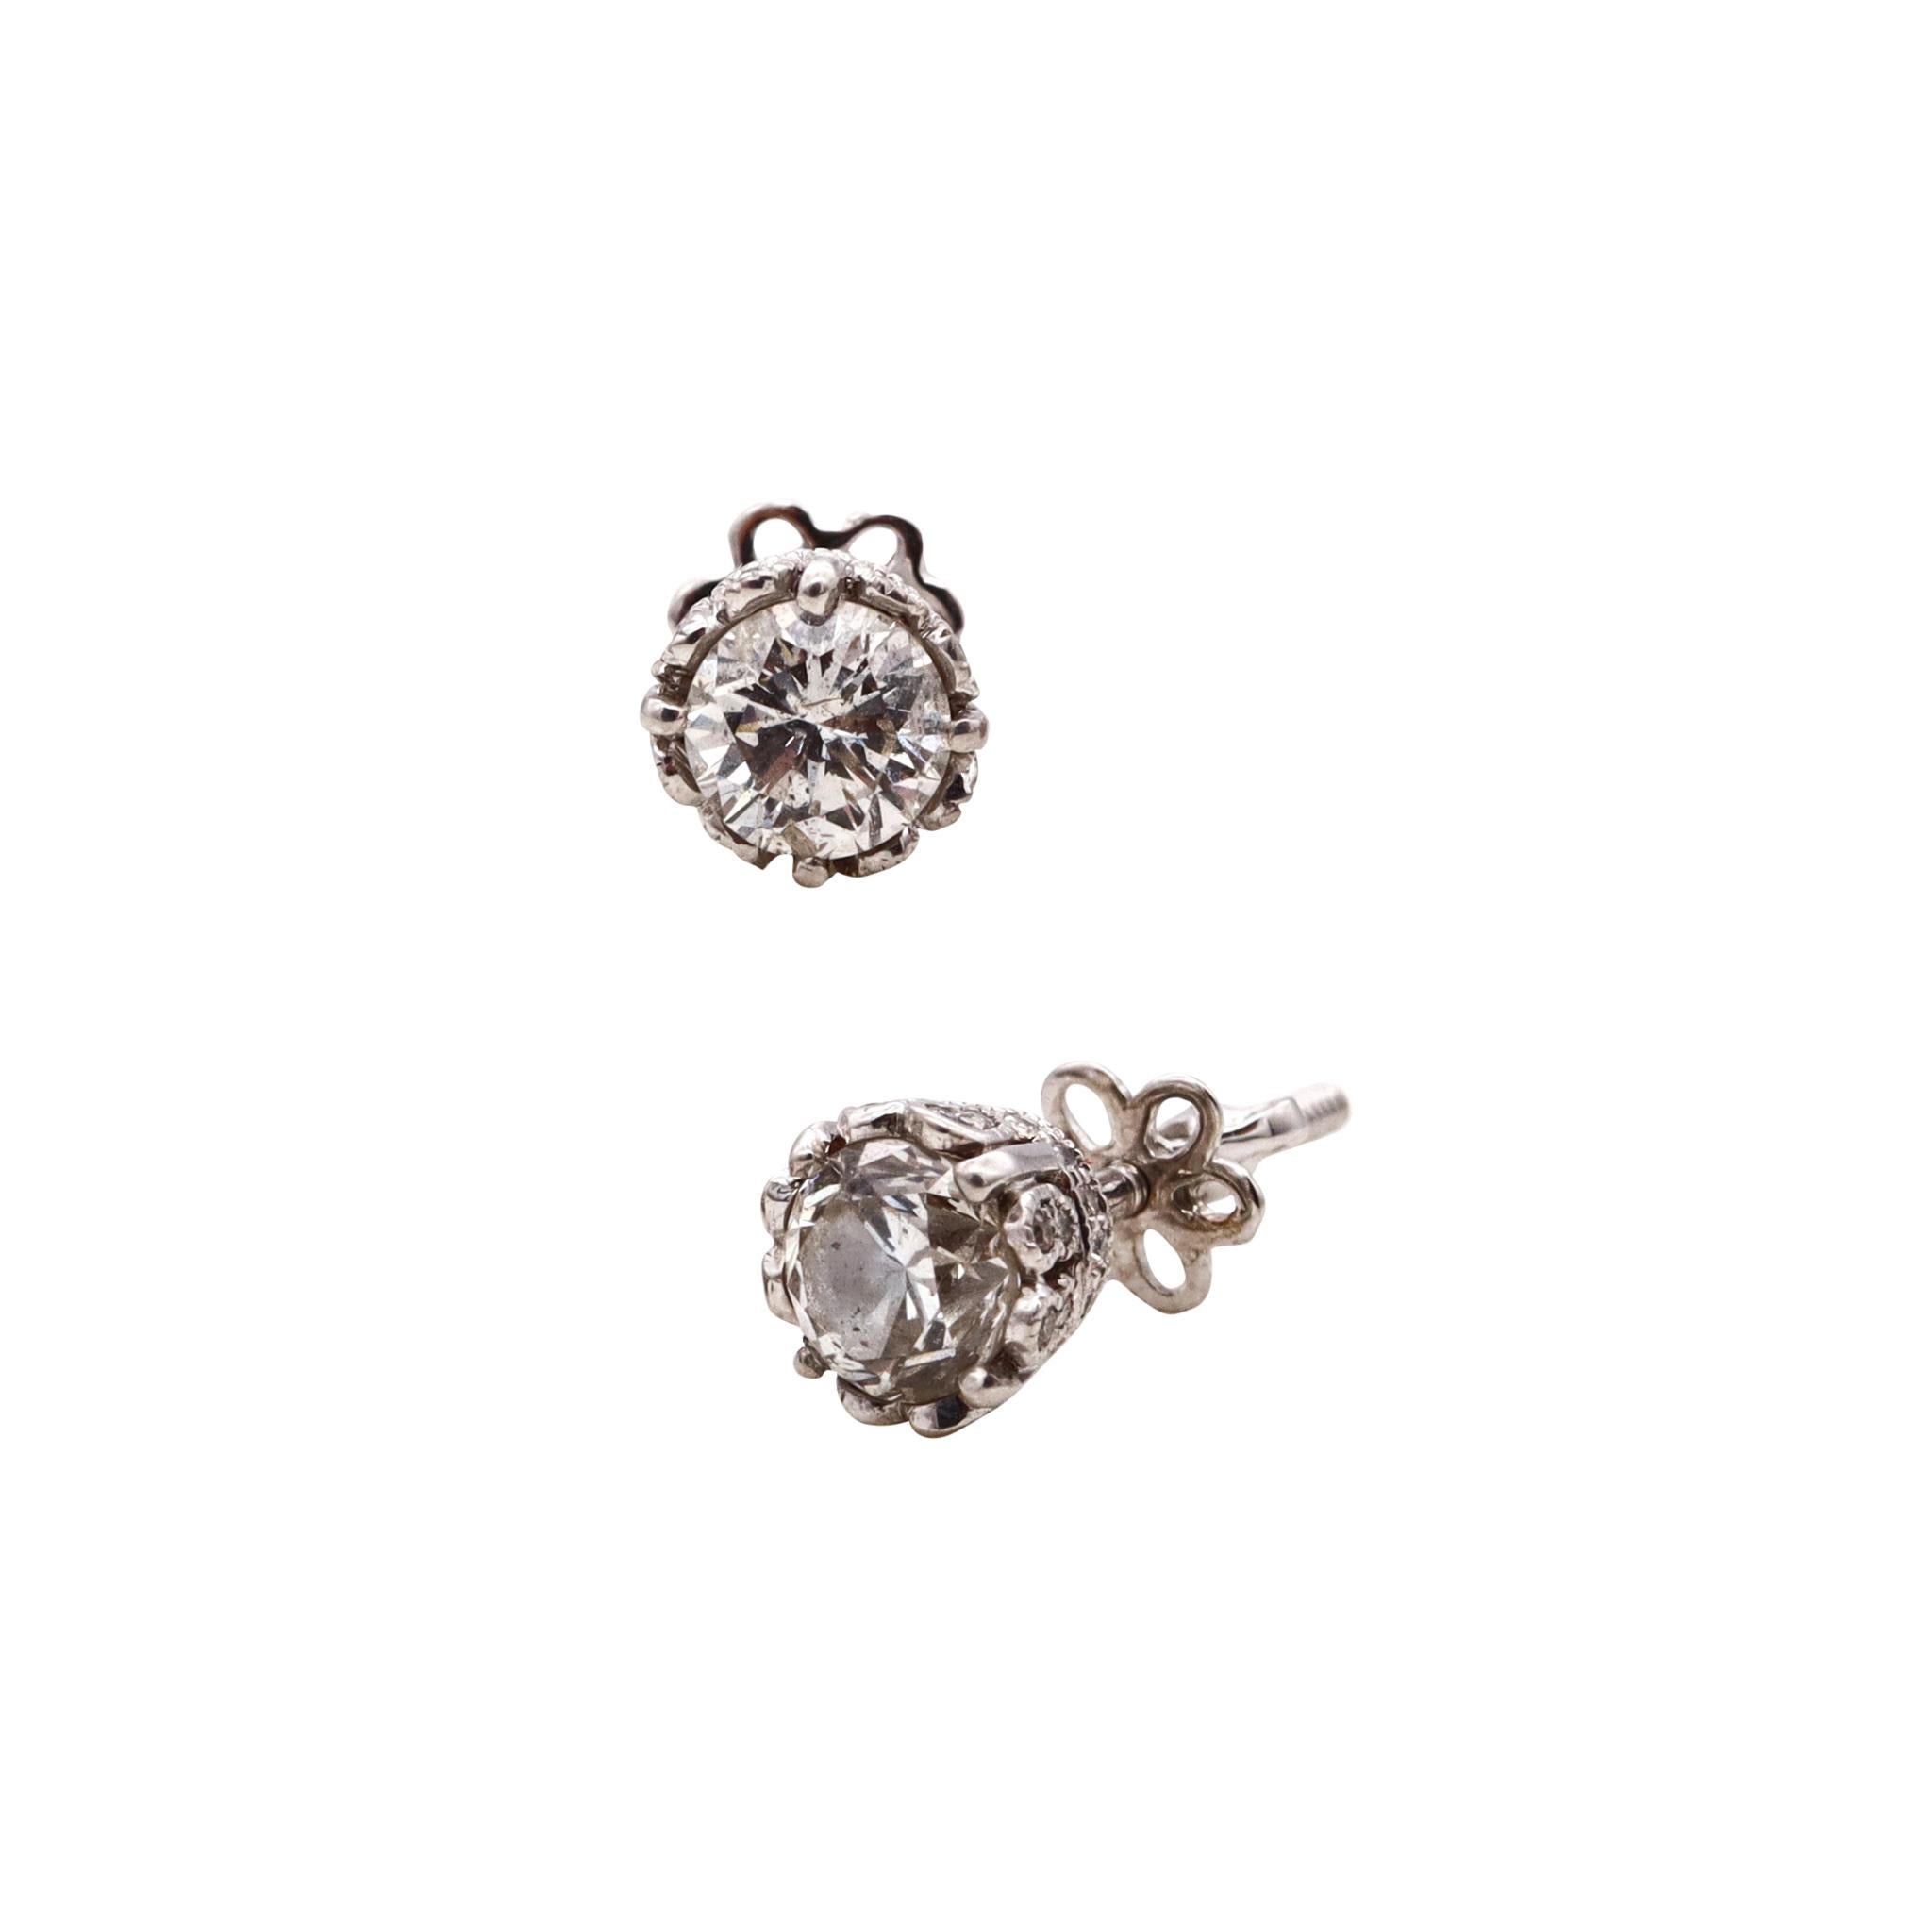 Pair of studs earrings with diamonds.

A modern recreation made in Germany from the art deco period, circa 1930's. These studs earrings has been carefully crafted in solid .950/.999 platinum and are suited with screw backs for pierced ears and a